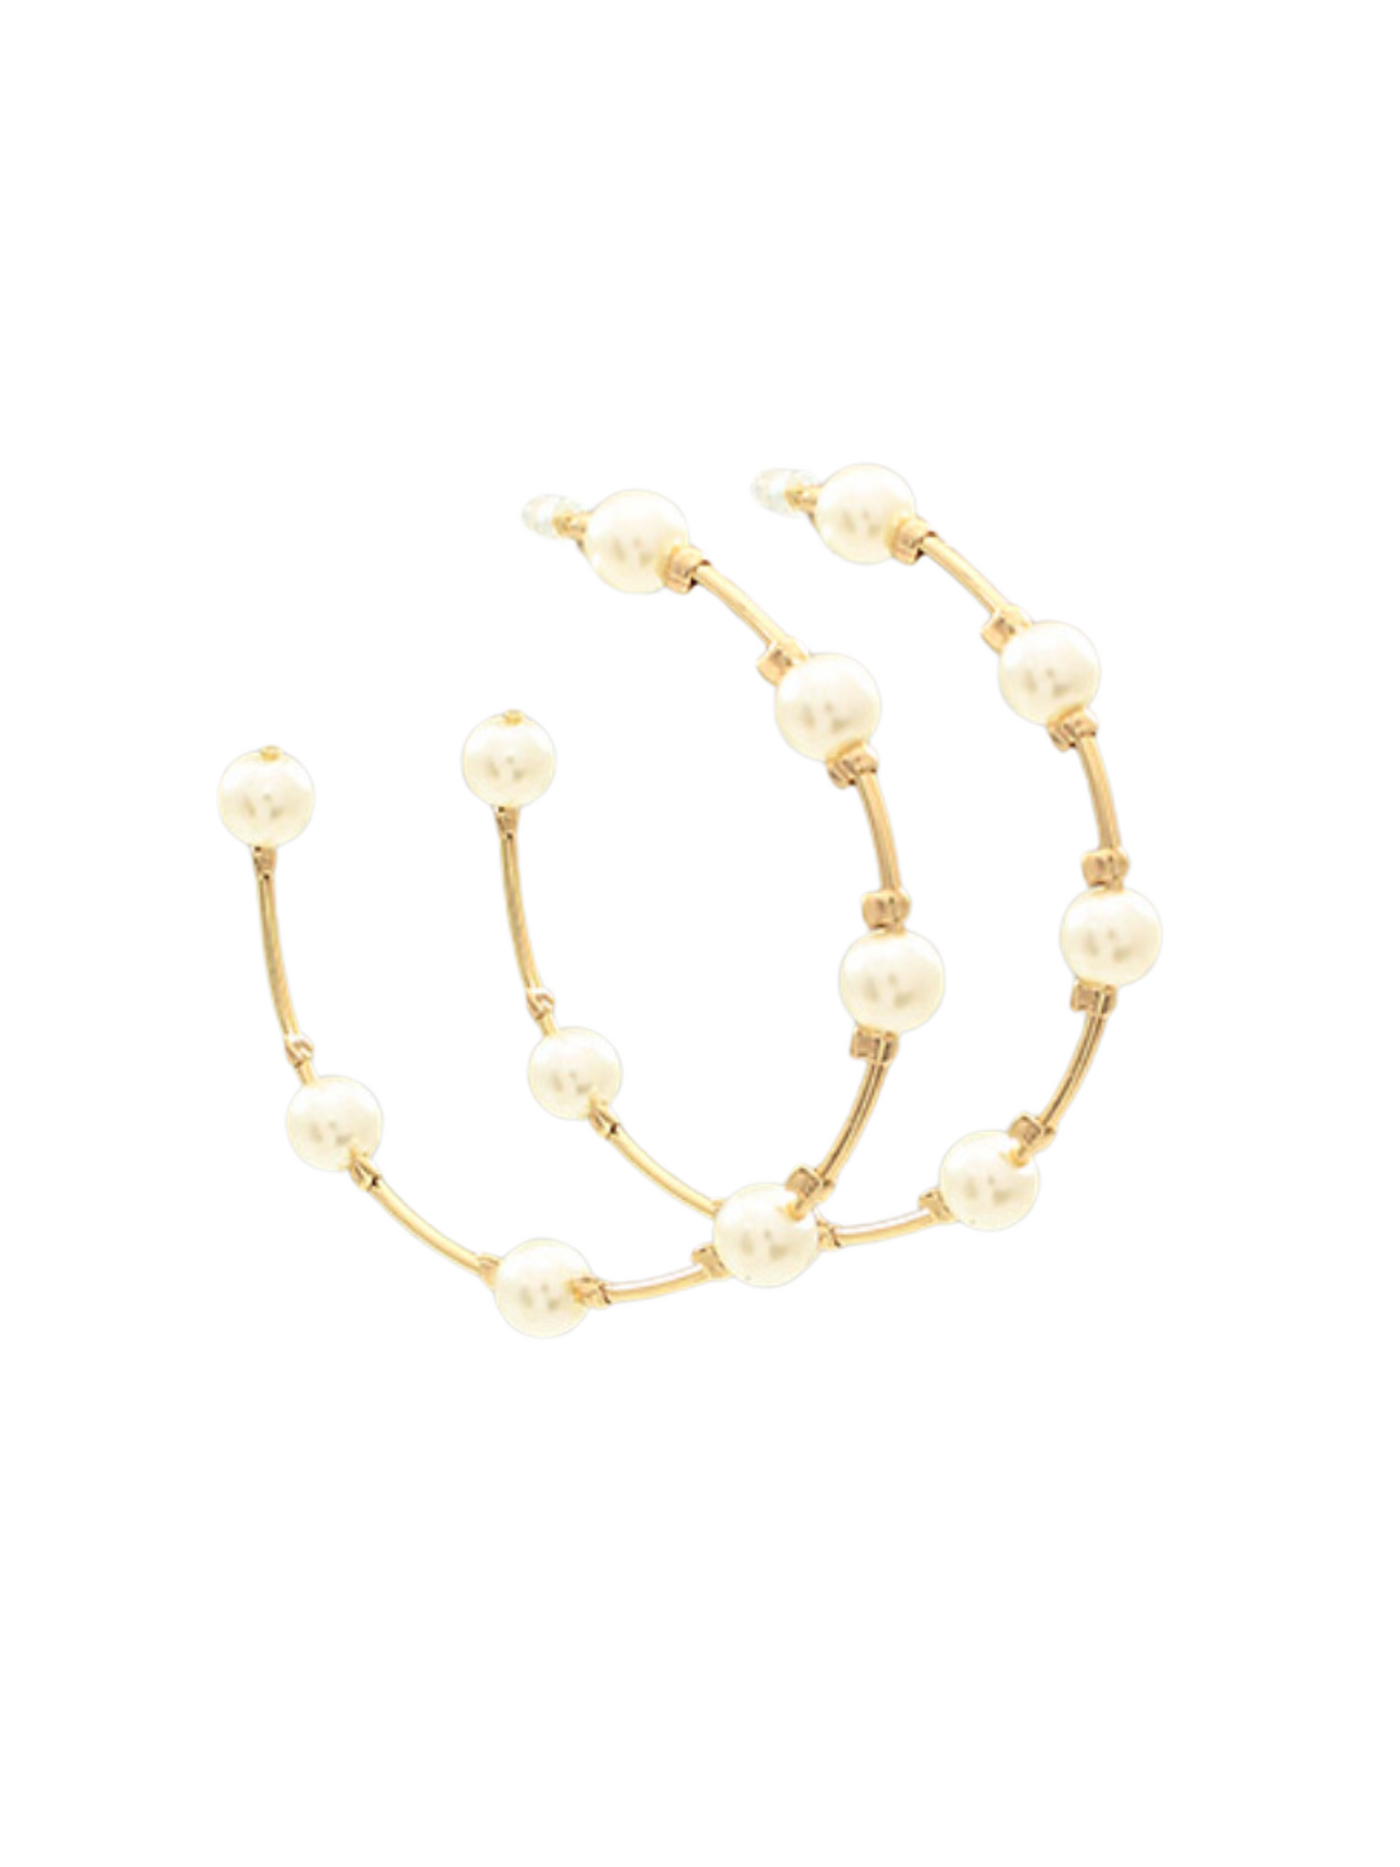 48mm Pearl Hoops on white background.